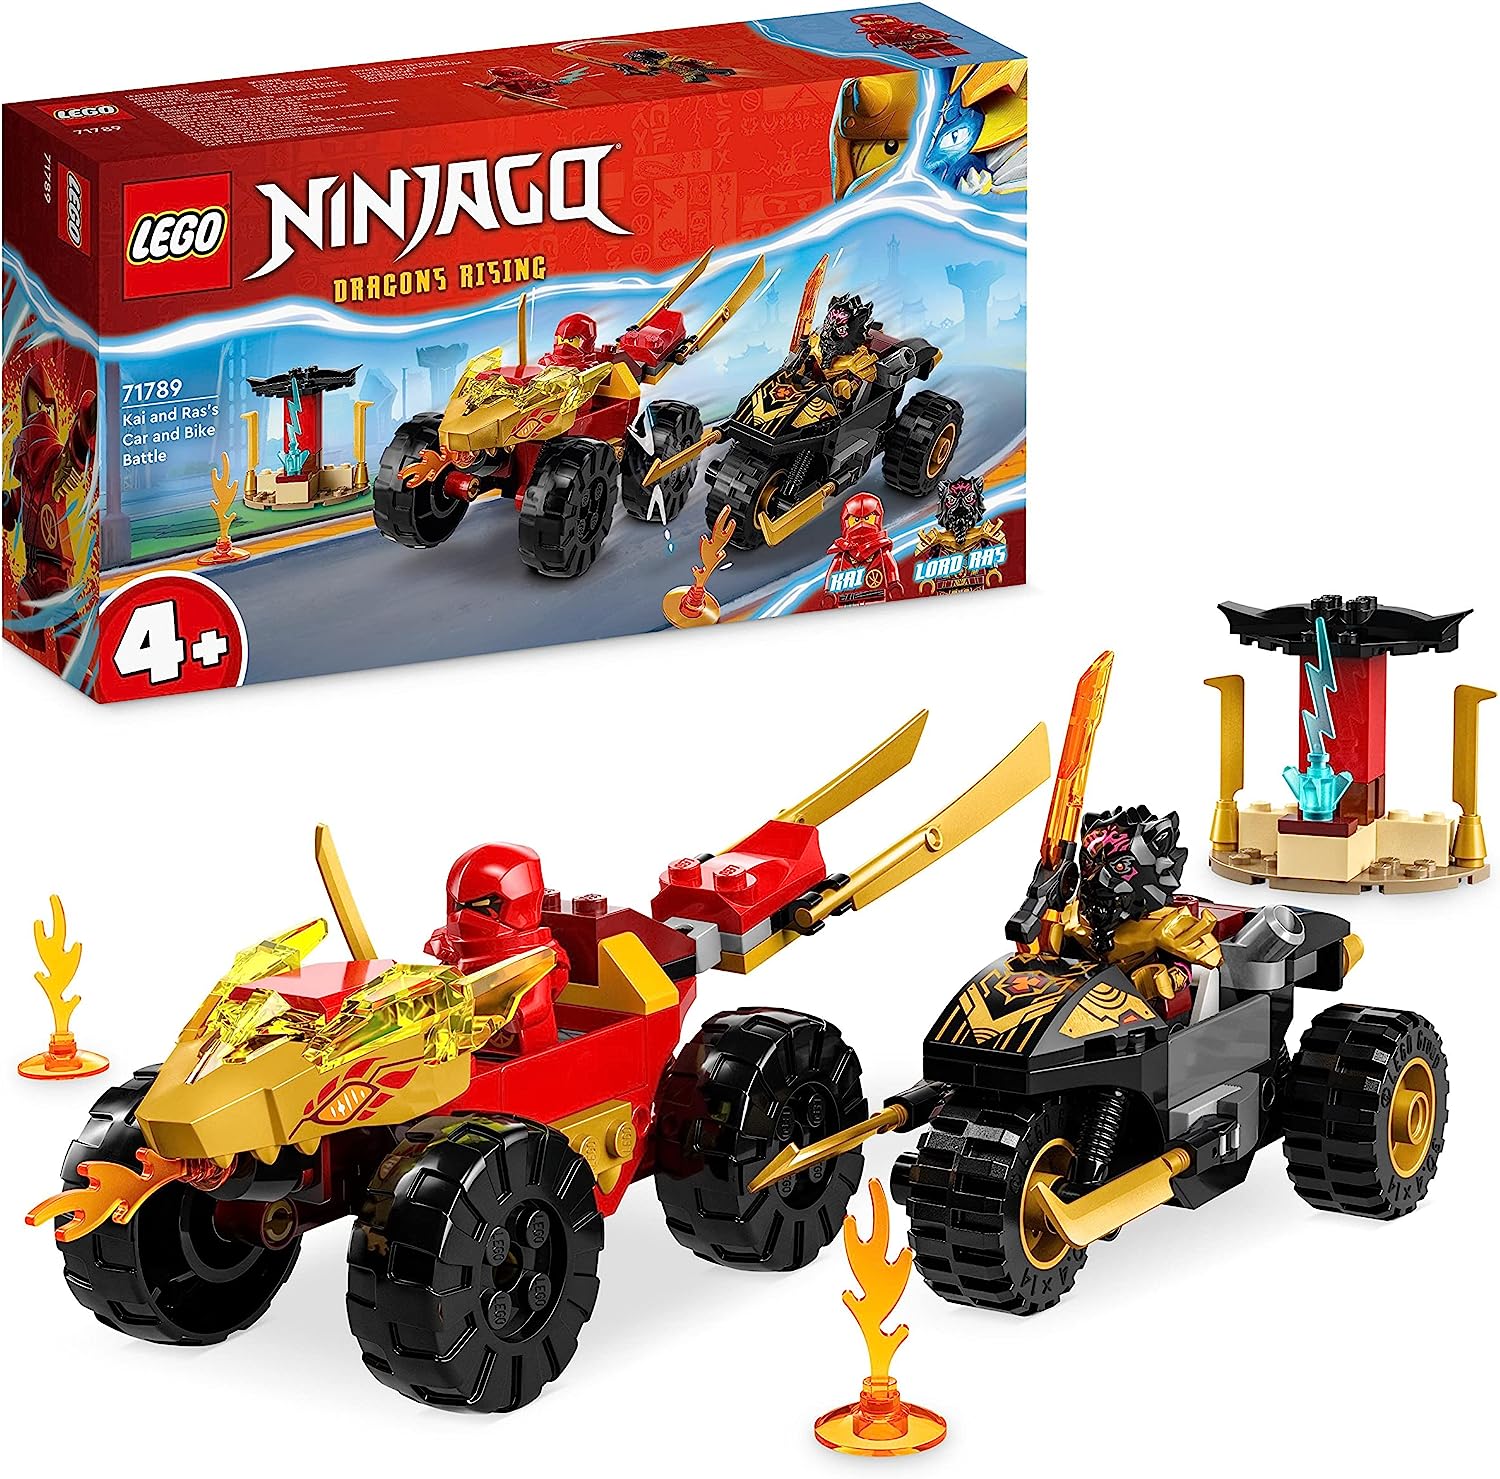 LEGO 71789 Ninjago Chase Set with Kais Speedster and Ras \ 'Motorcycle, Toy for Children from 4 Years, Ninja Car Toy for Building, Mini Figure to Collect